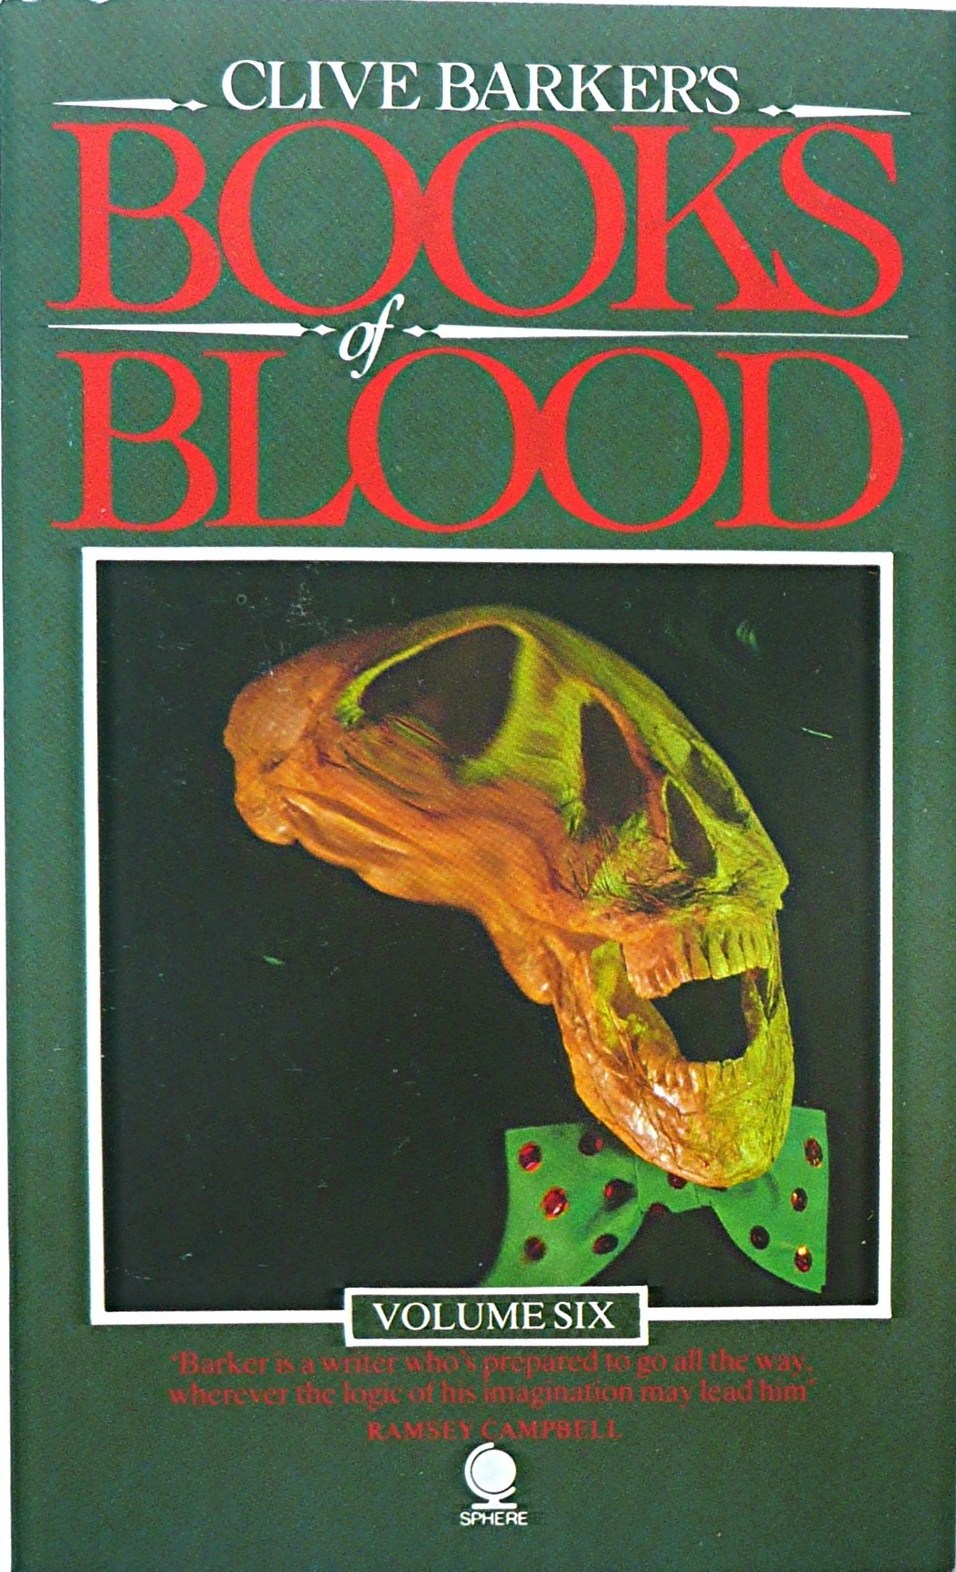 The Books of Blood Volume 6 Clive Barker and Mark Miller